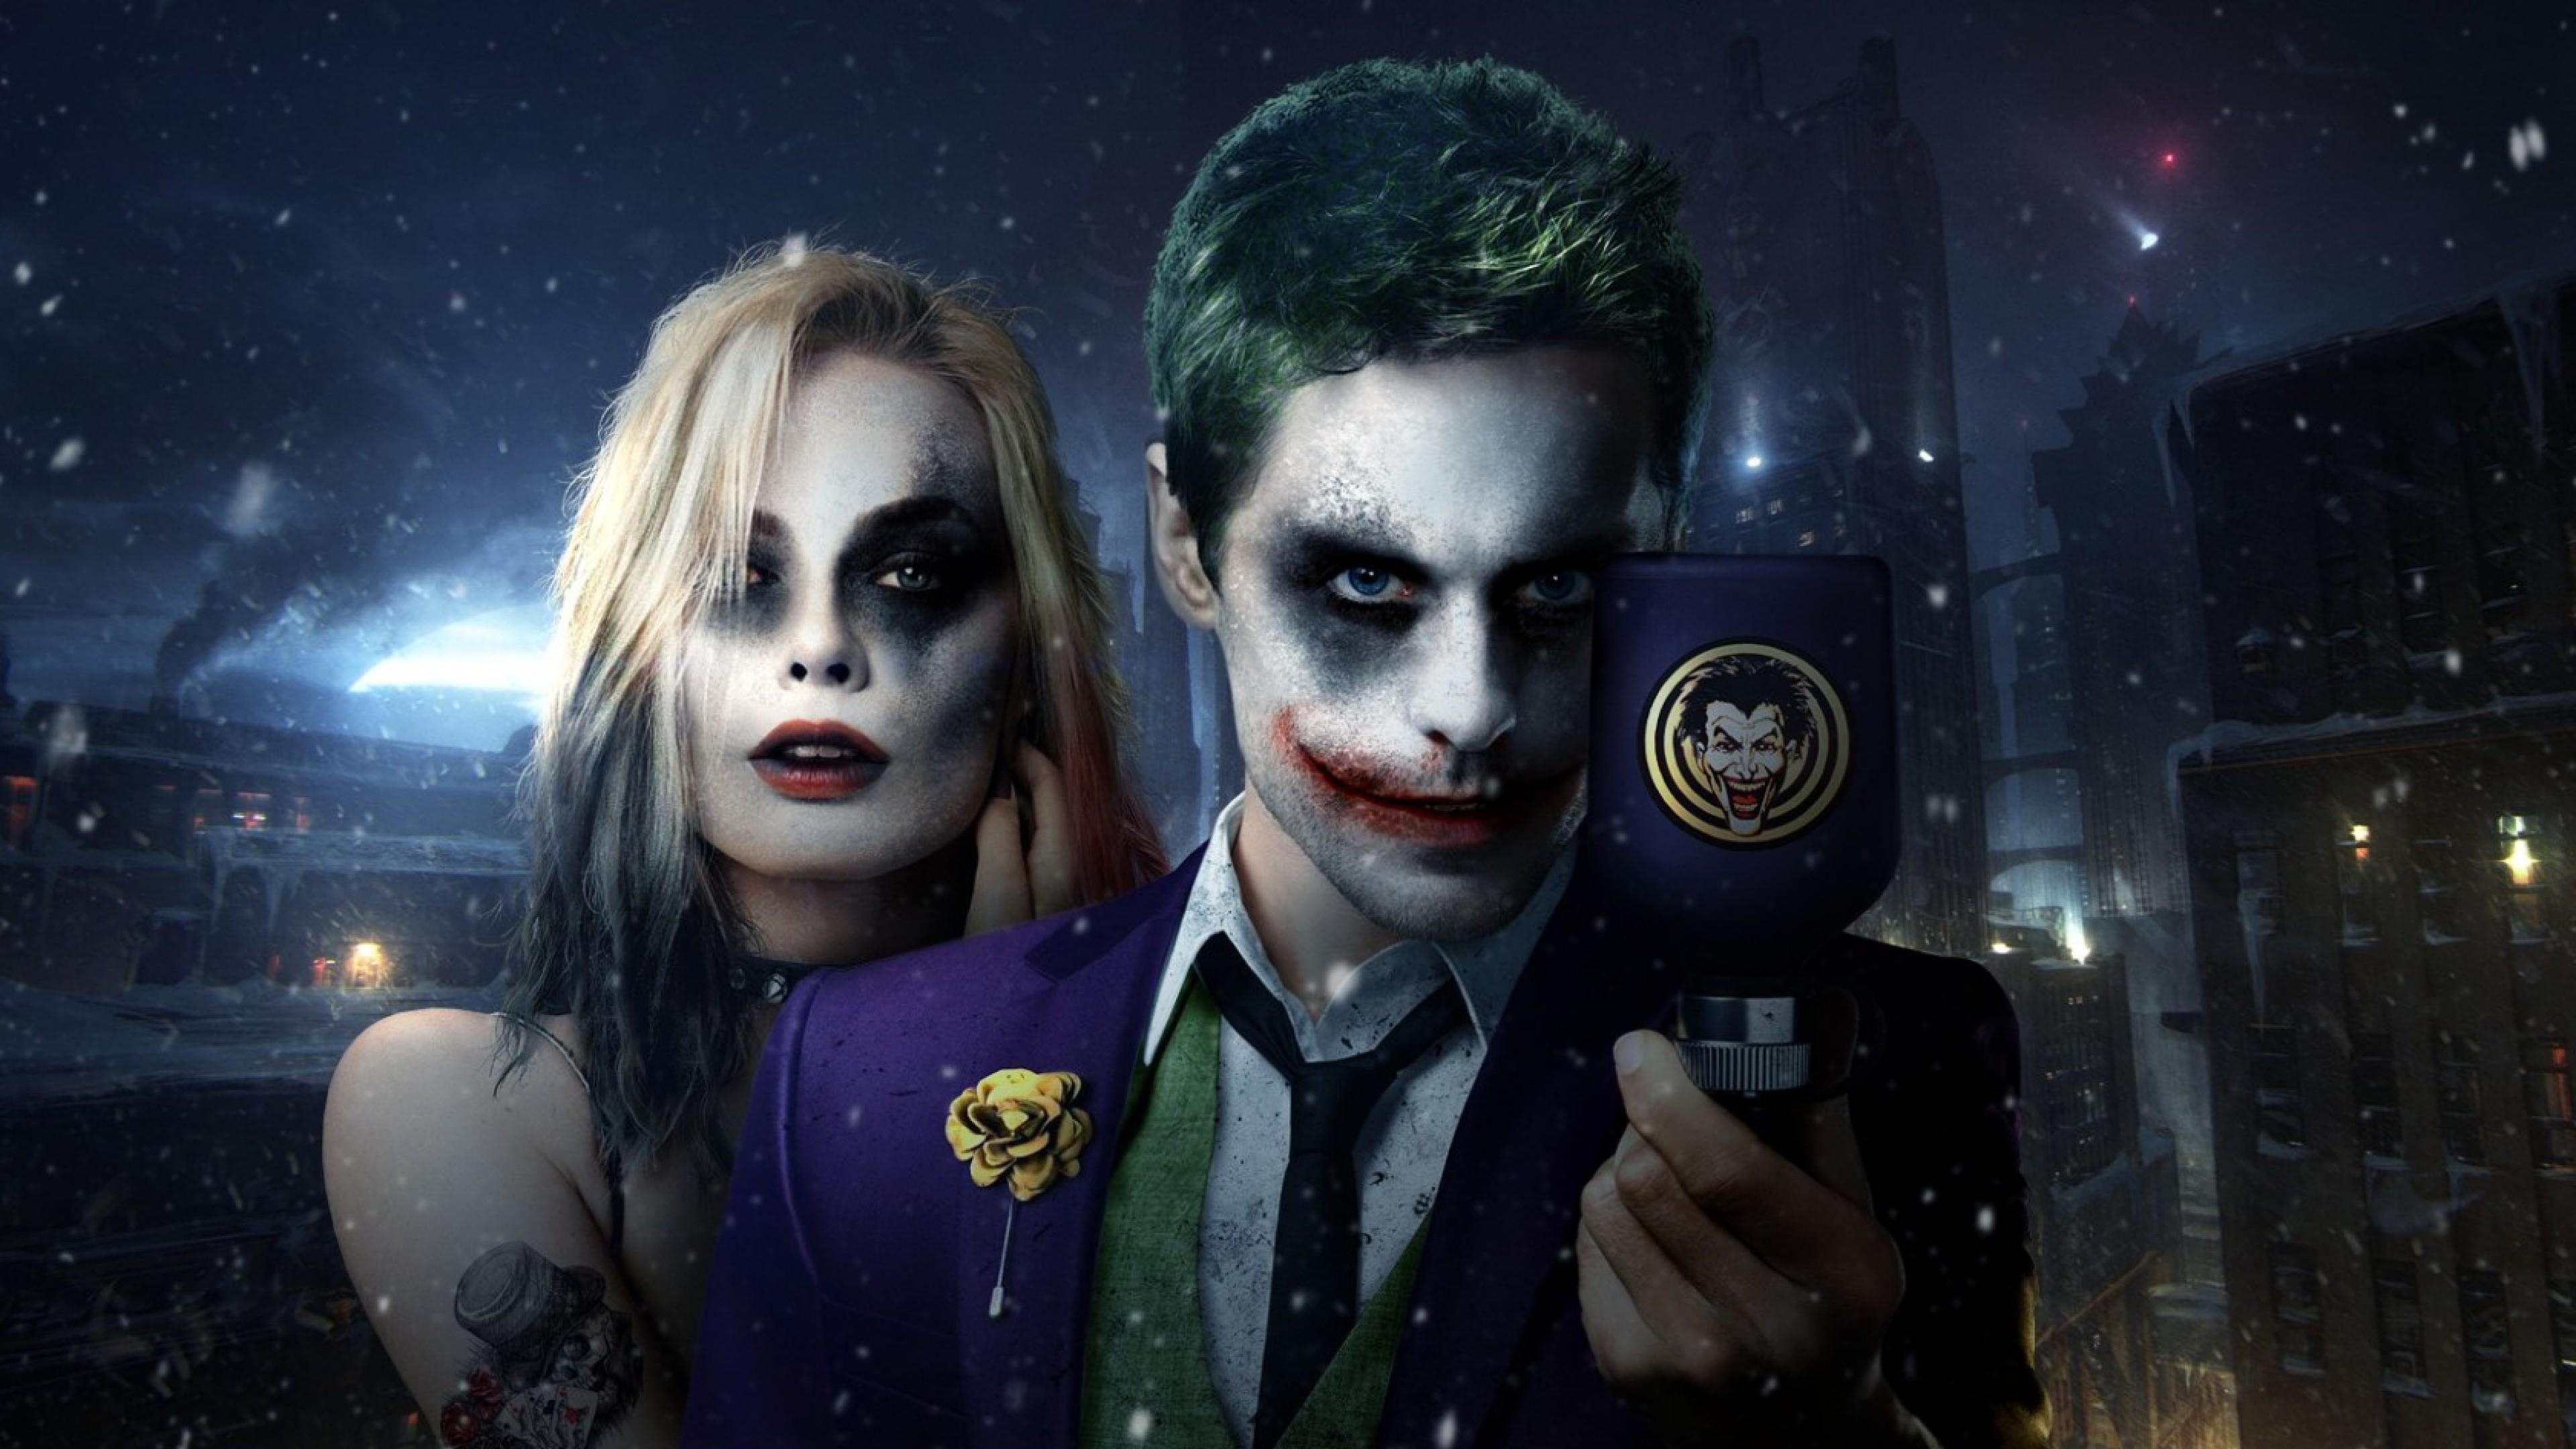 The Joker And Harley Quinn Images The Joker Hd Wallpaper And